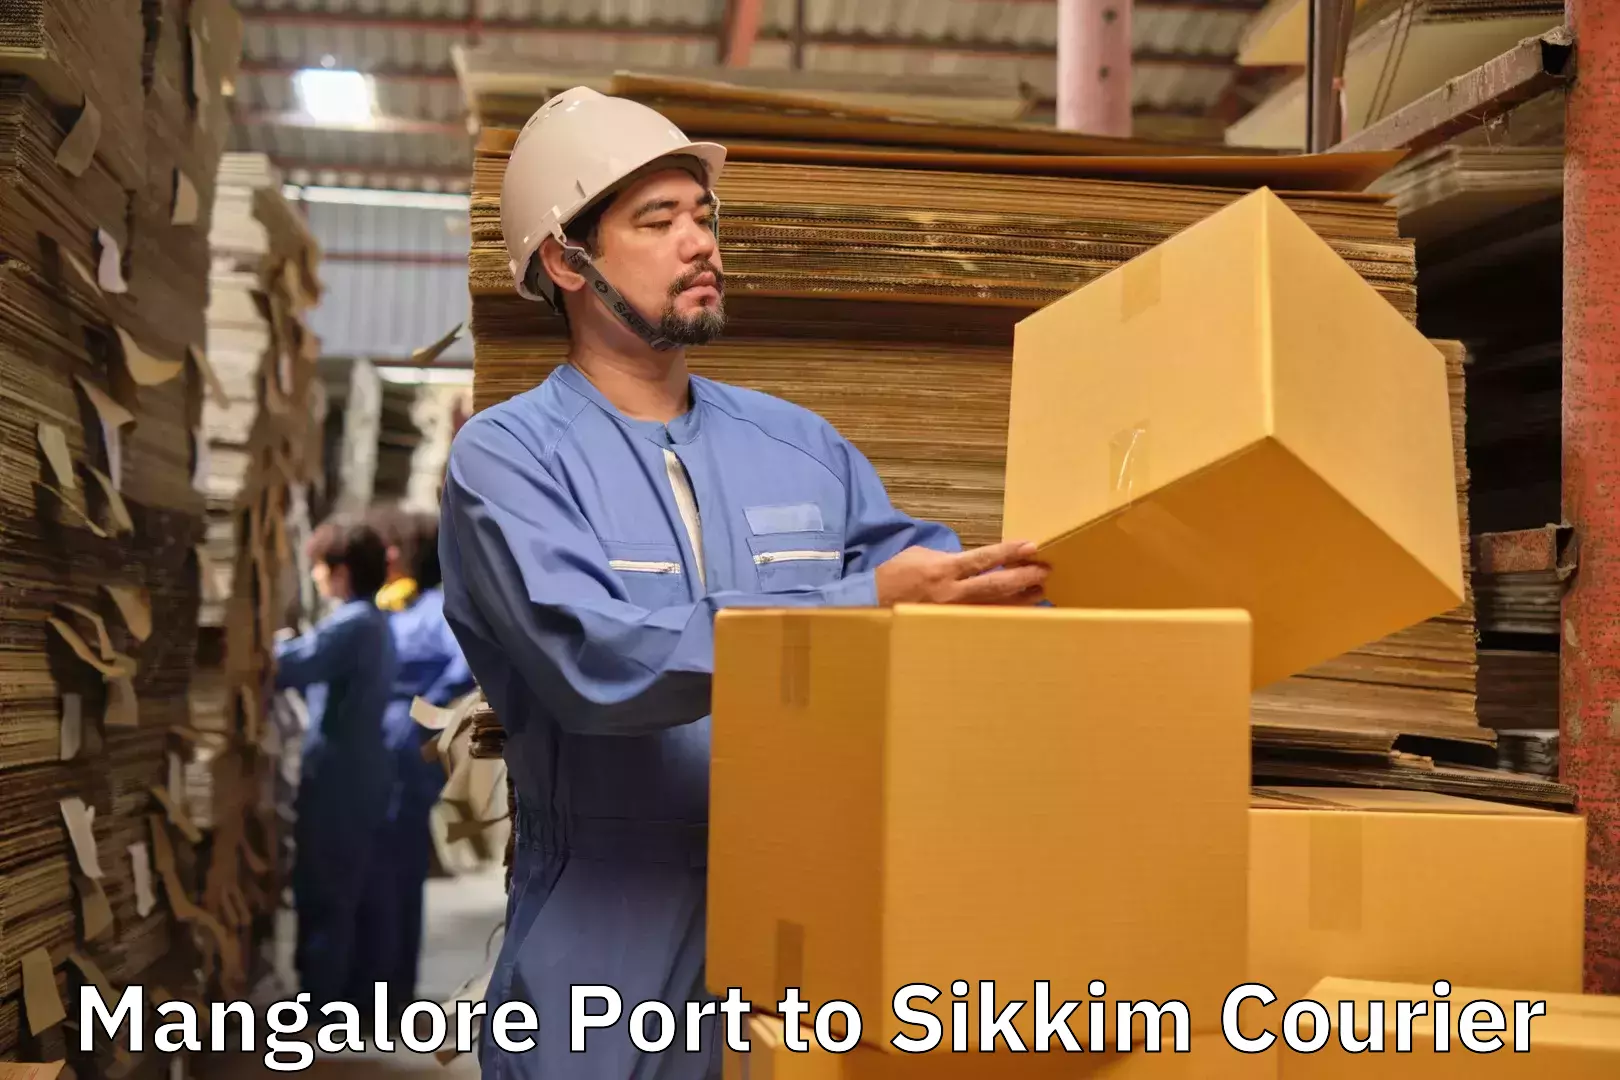 Luggage transport consultancy Mangalore Port to Sikkim